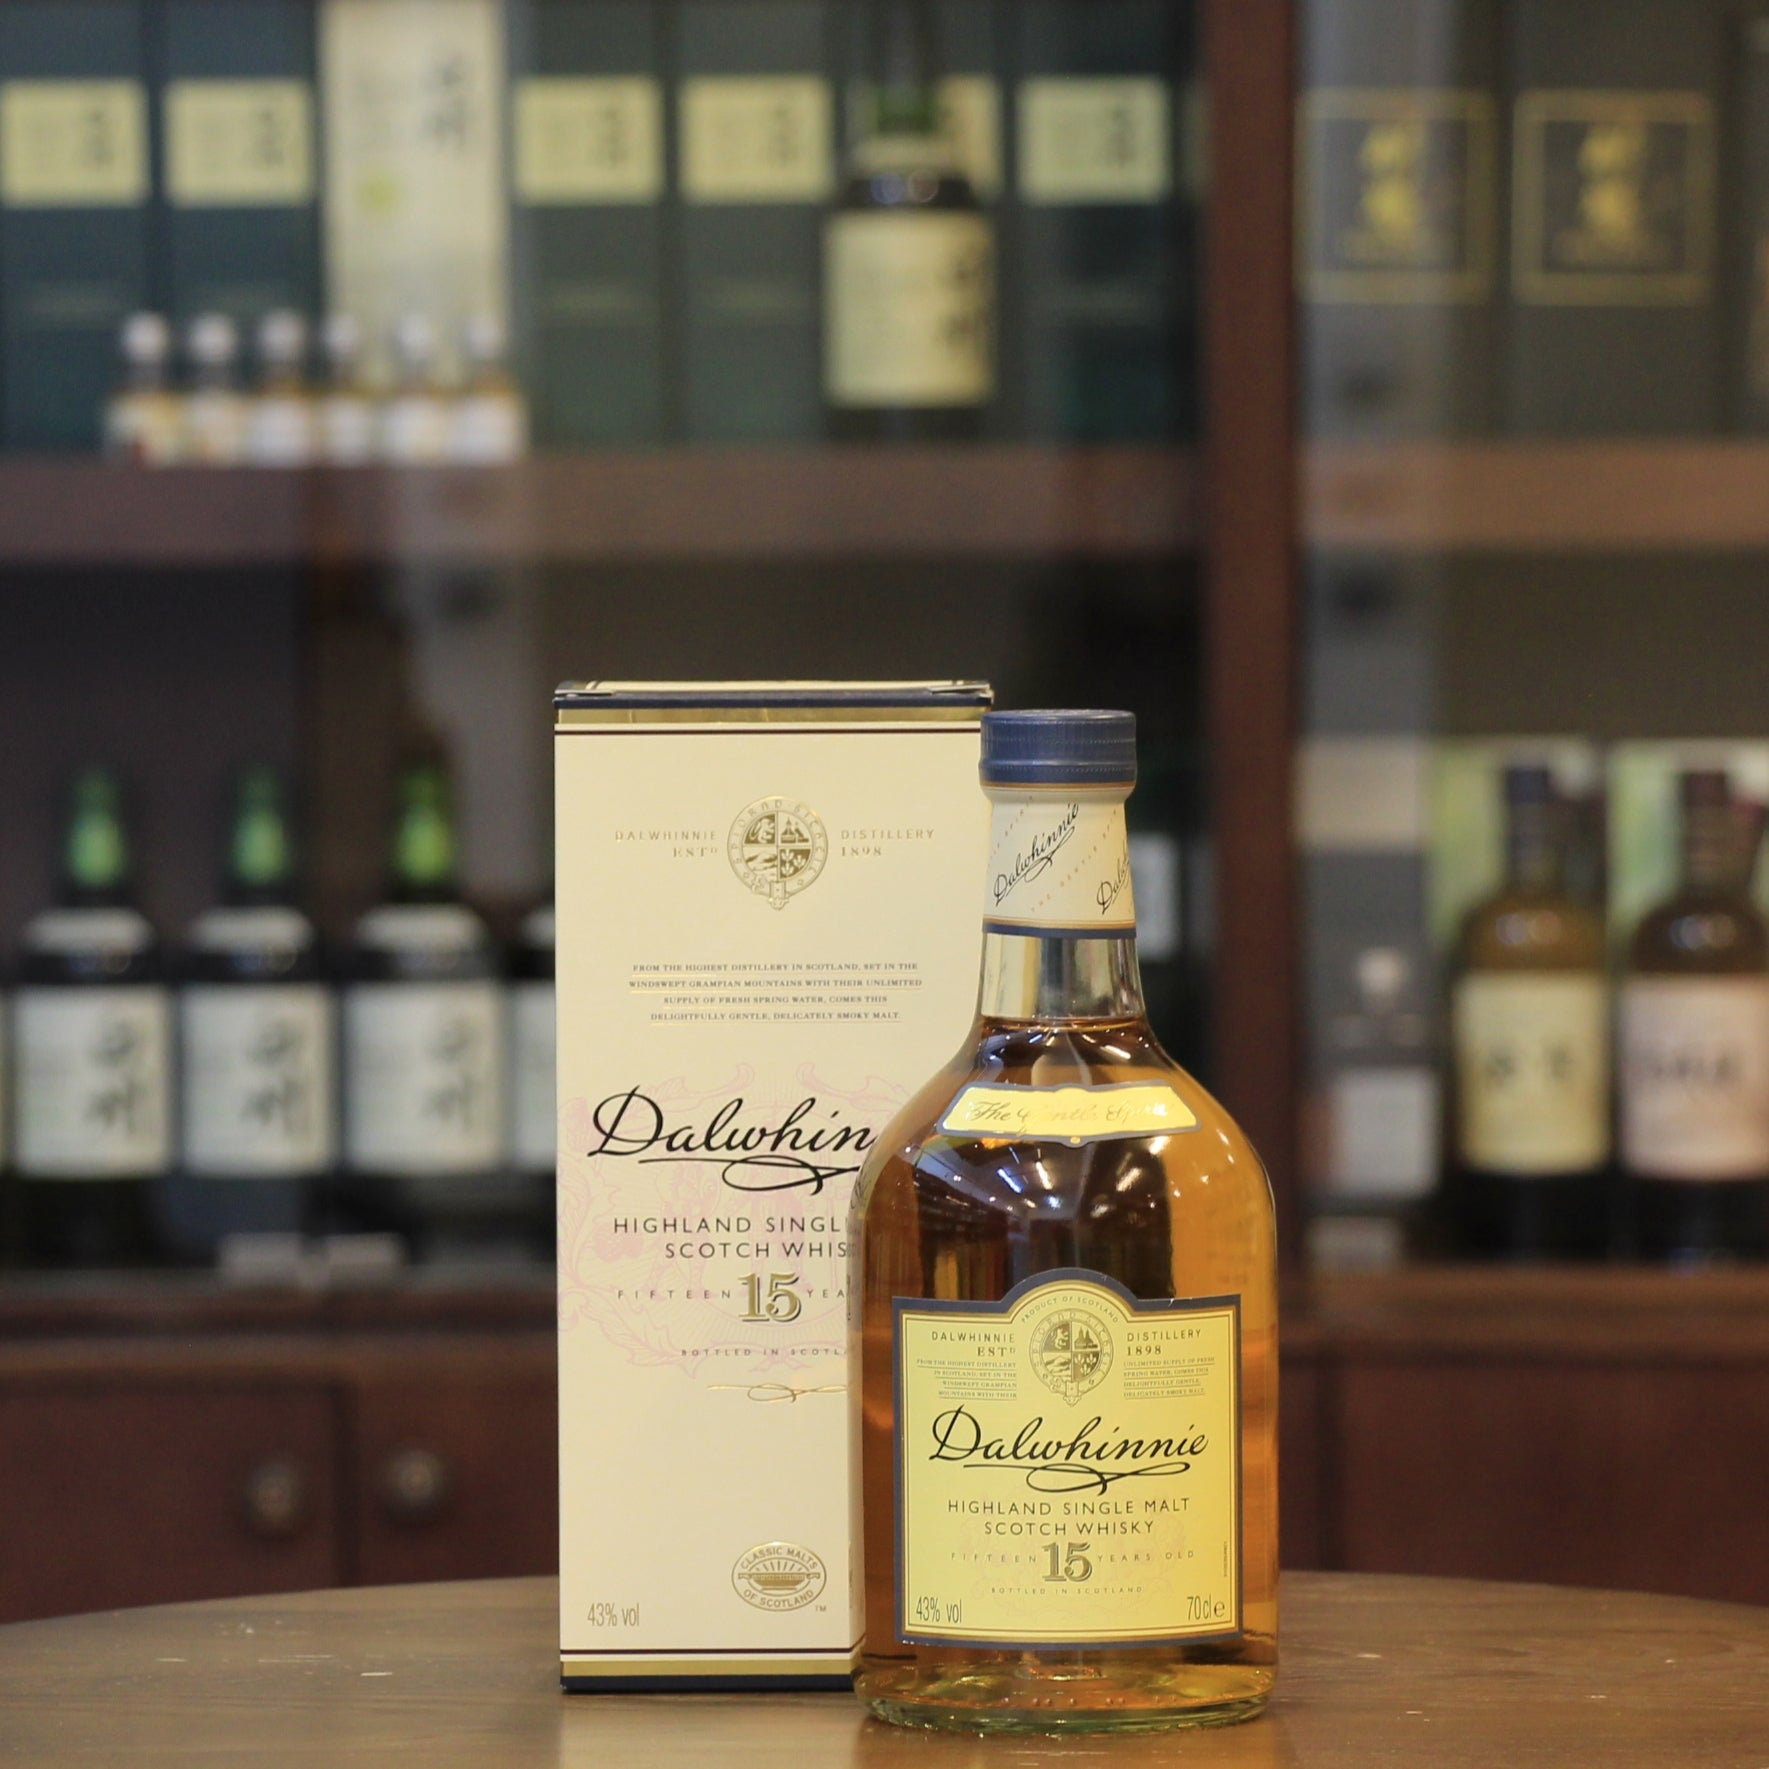 Representing the Highlands region within the Classic Malts selection of Diageo, this 15 year old bottling from Dalwhinnie forms the core expression from the distillery. A smooth and gentle single malt offering creamy vanilla and heather honey sweetness on the palate with a subtle smoky finish.